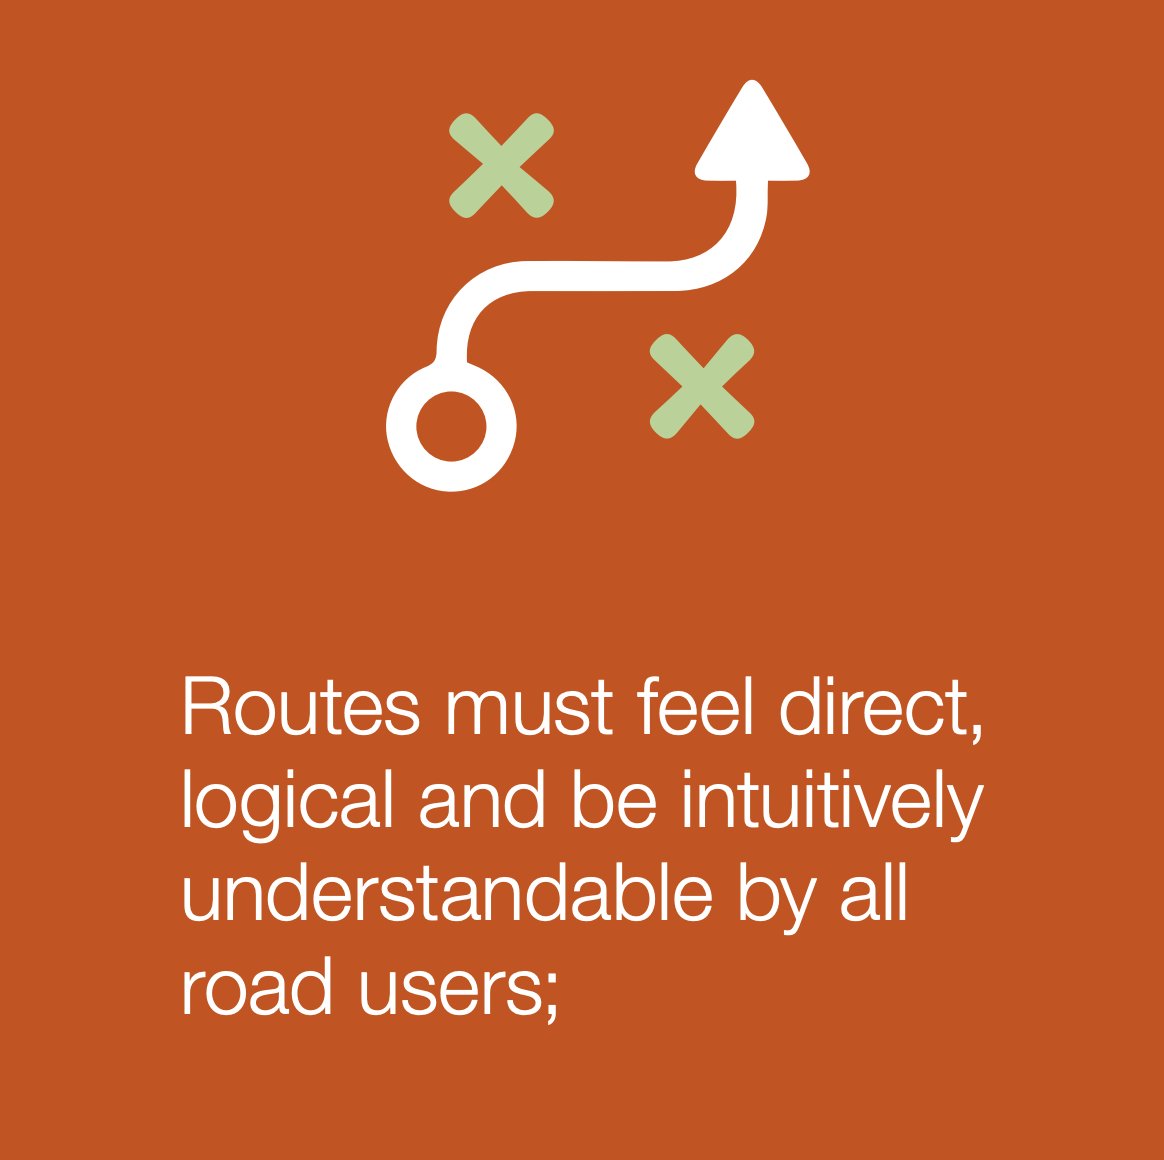 The next  @transportgovuk Key Design Principle:"Routes must feel direct, logical and be intuitively understandable by all road users."